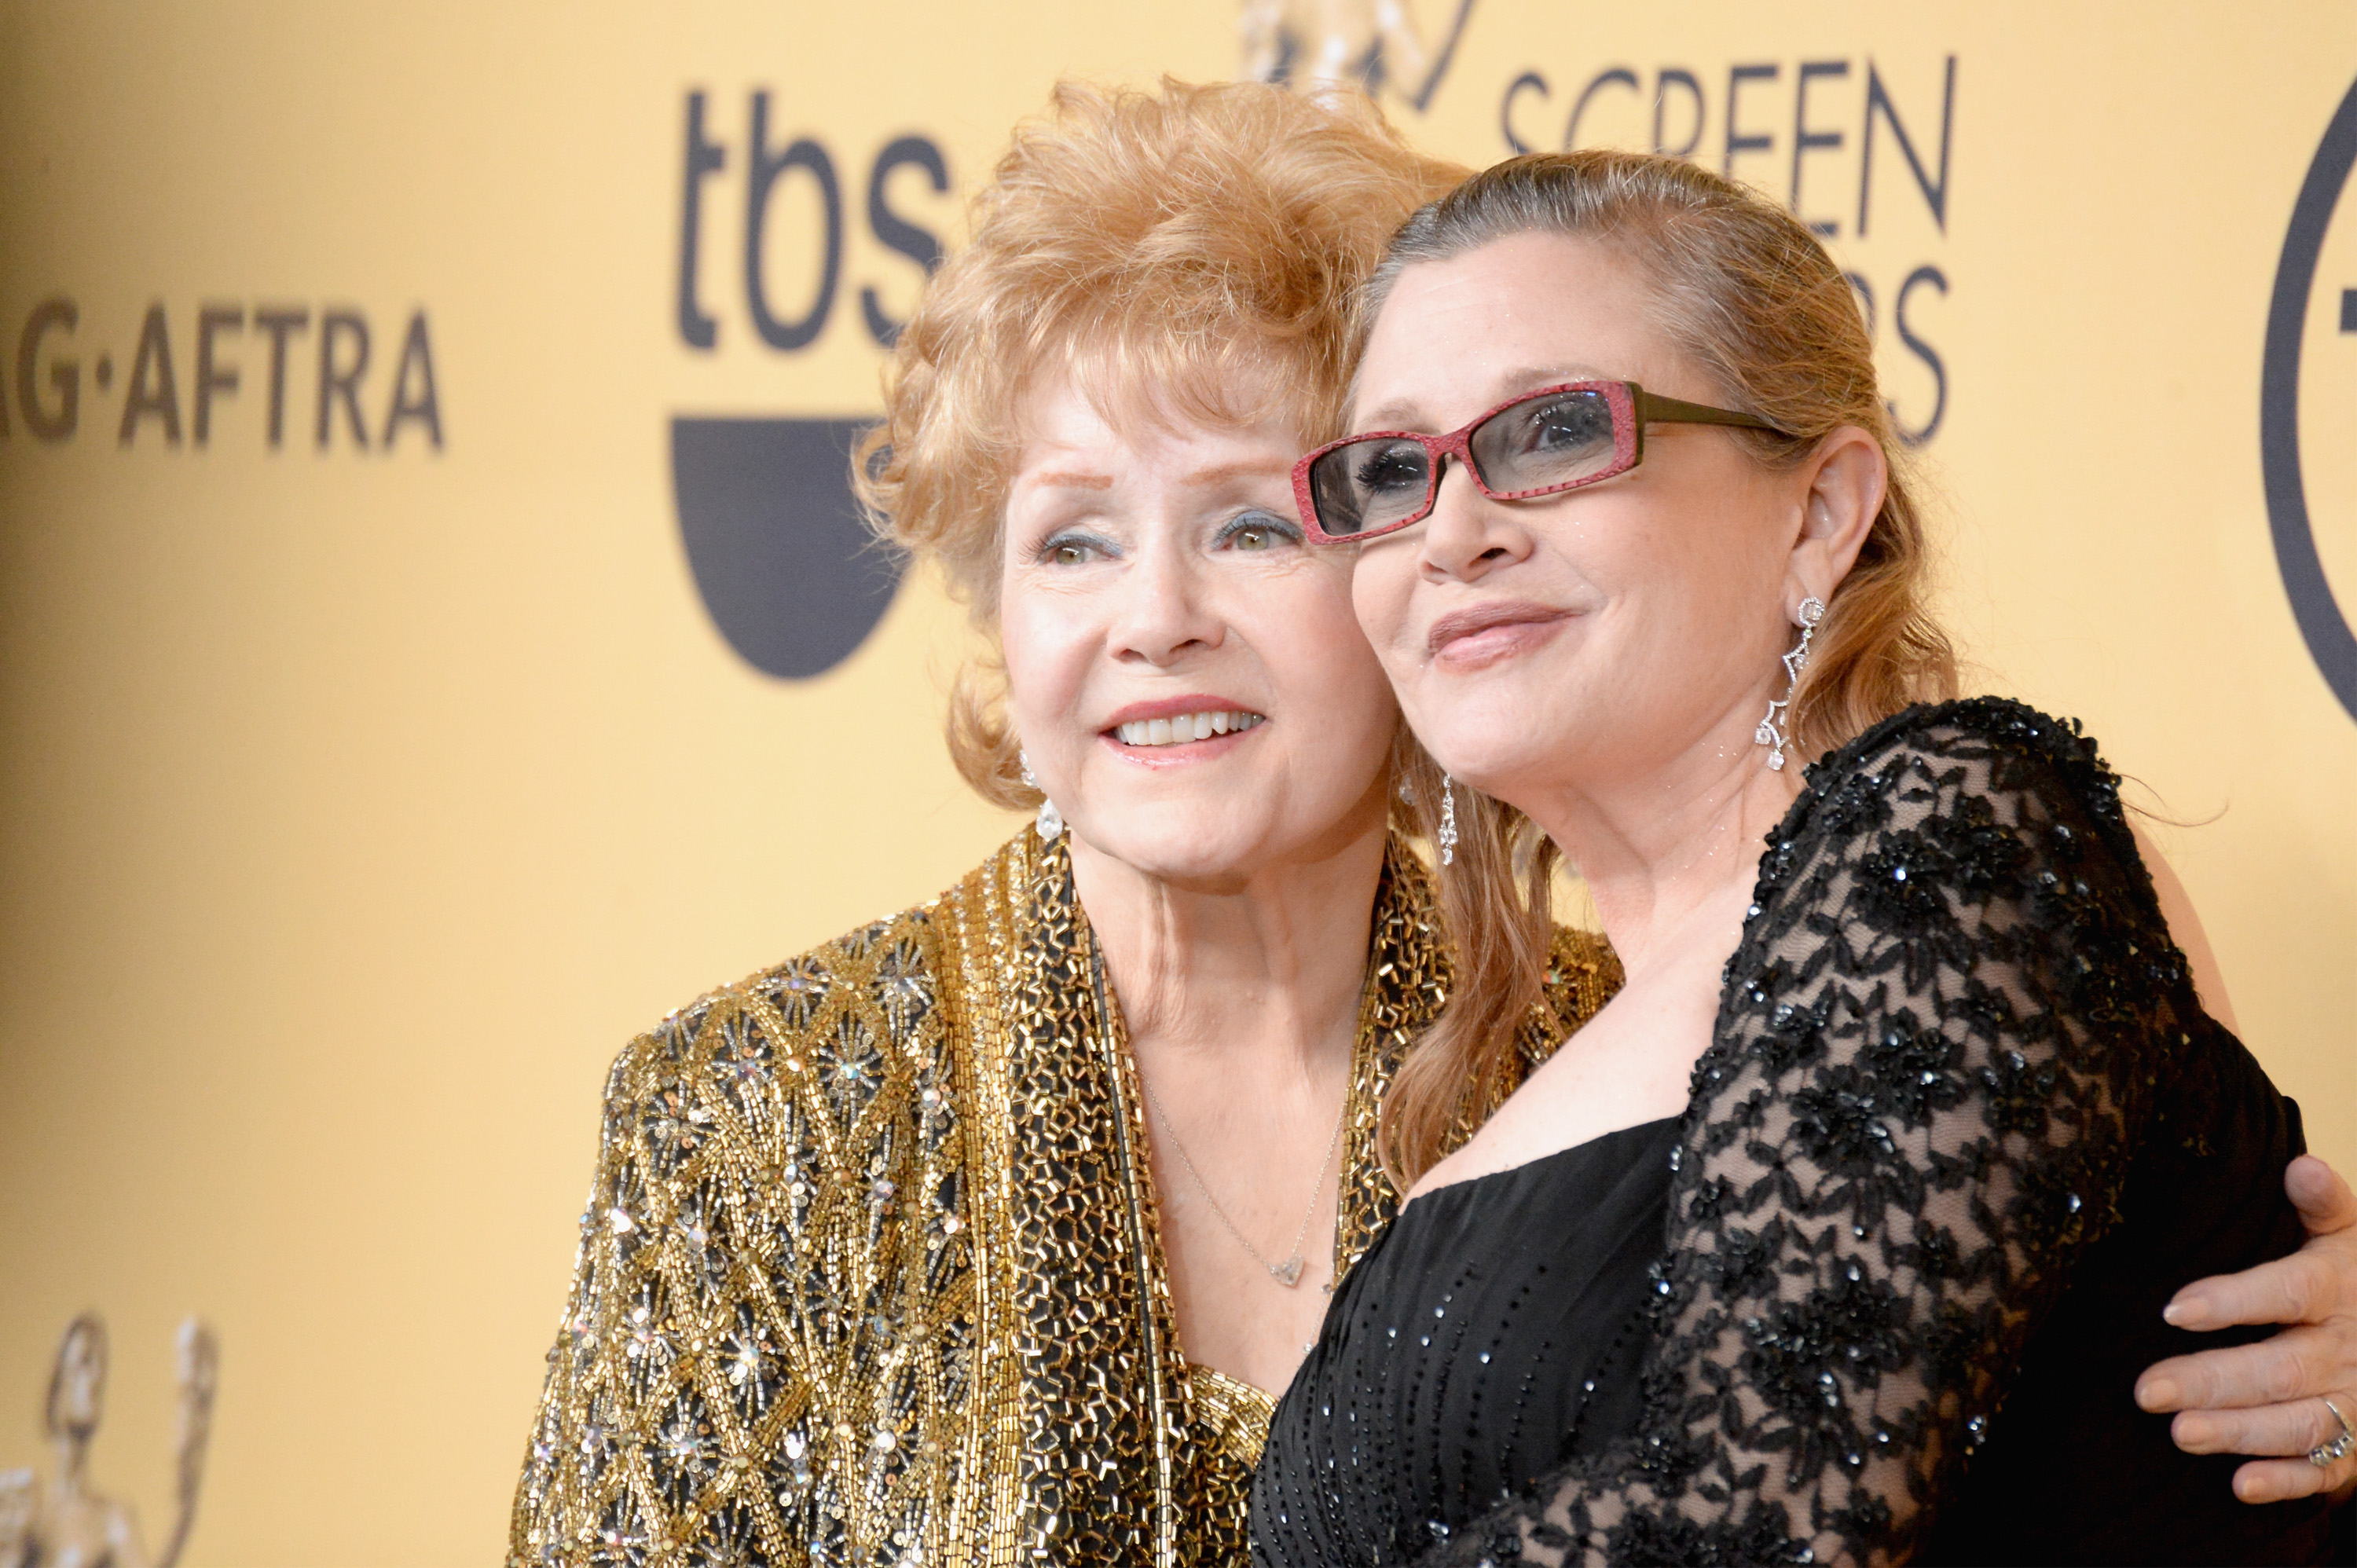 Actresses Debbie Reynolds (L) and Carrie Fisher pose in the press room at the 21st Annual Screen Actors Guild Awards at The Shrine Auditorium on January 25, 2015 in Los Angeles, California.